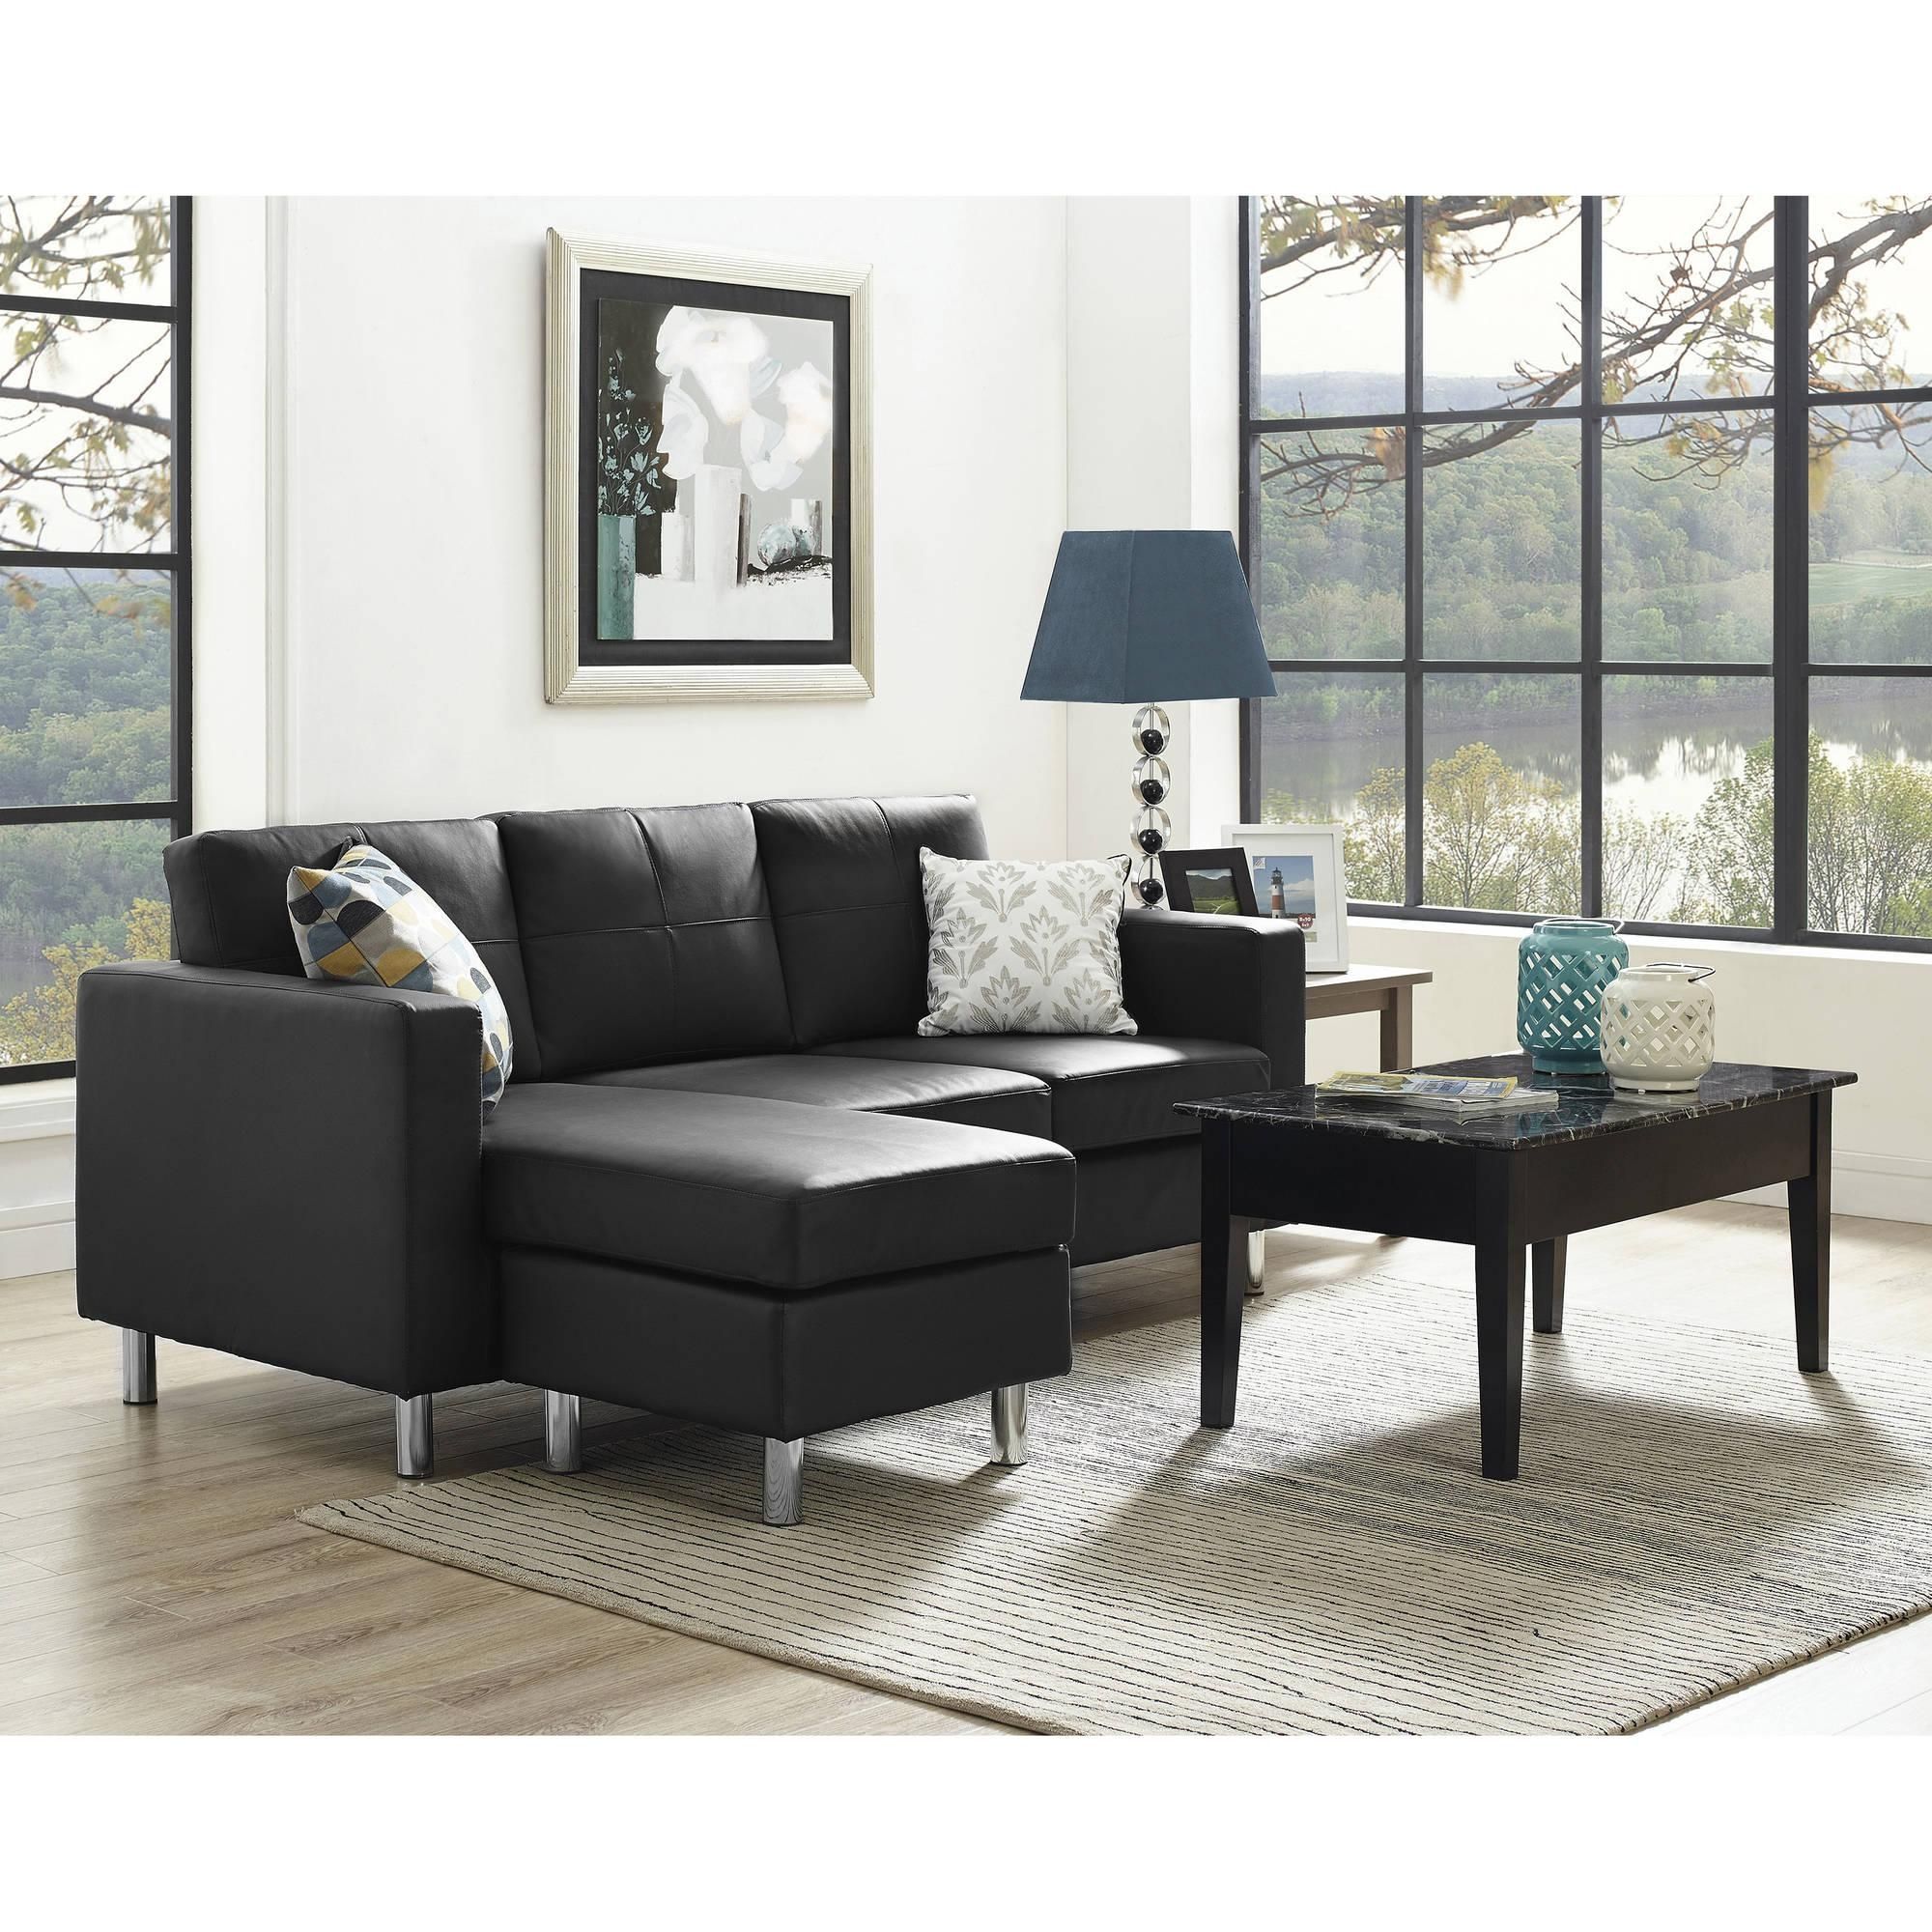 Dorel Living Small Spaces Configurable Sectional Sofa, Multiple Inside Inexpensive Sectional Sofas For Small Spaces (View 10 of 20)